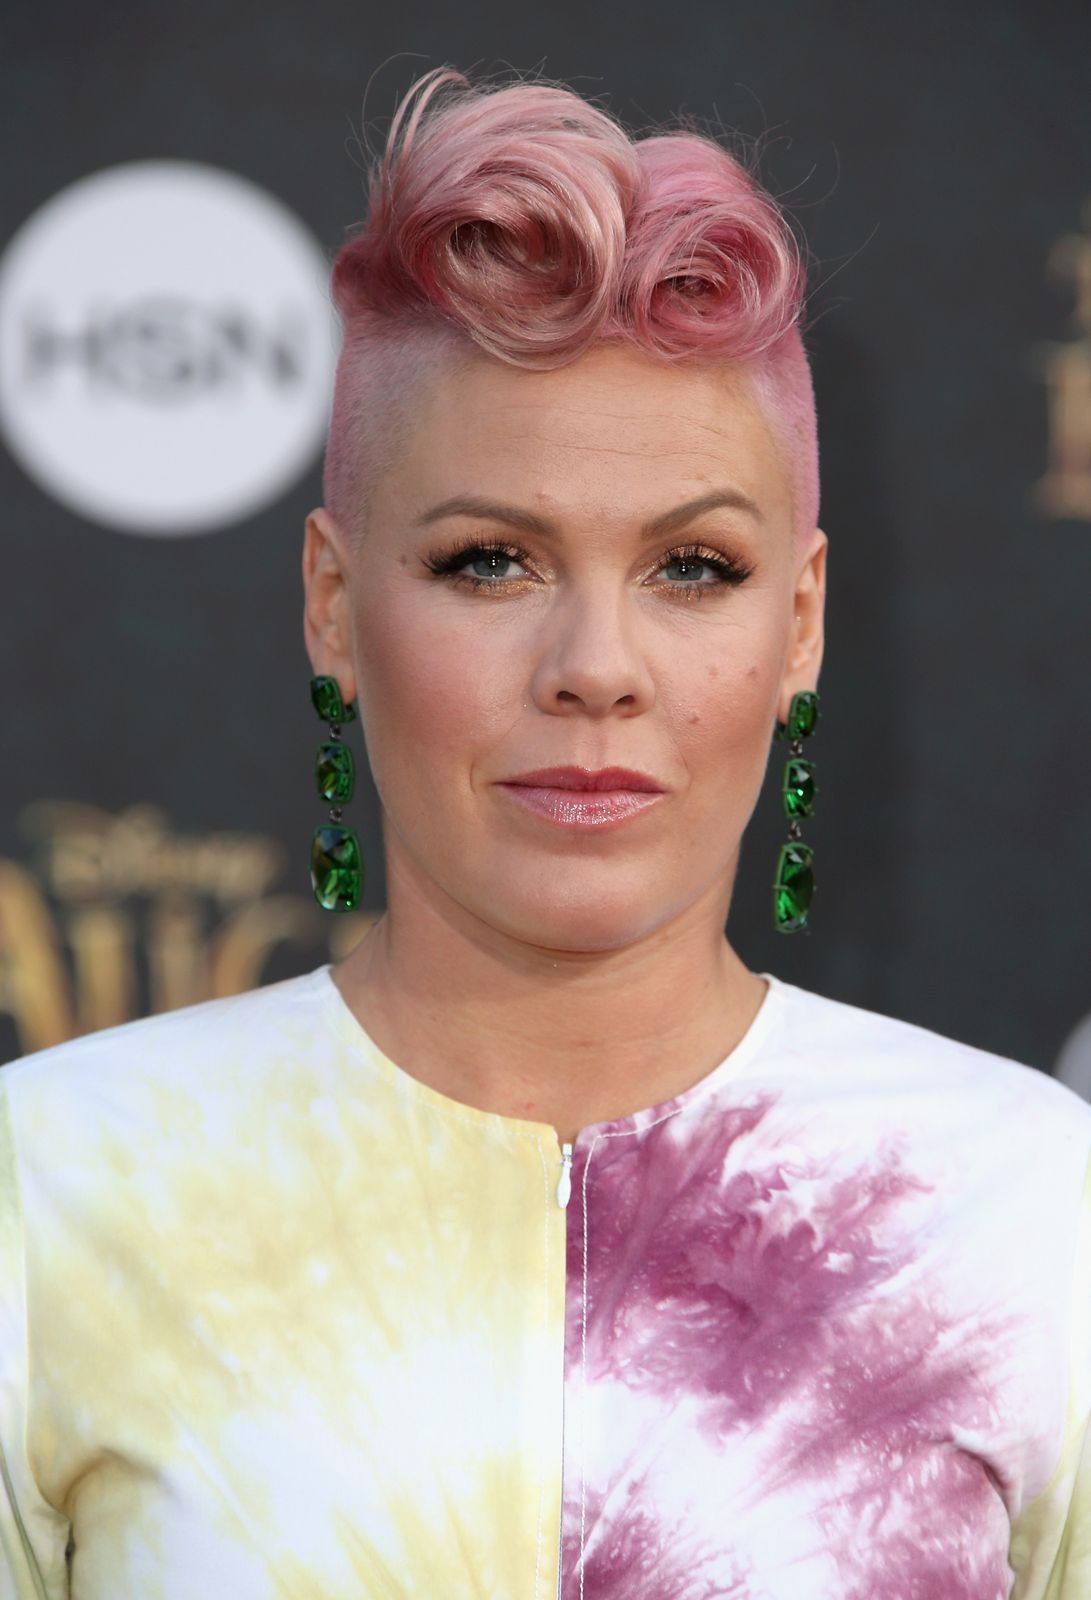 Pink at the premiere of Disney's "Alice Through The Looking Glass" on May 23, 2016, in Hollywood, California | Photo: Frederick M. Brown/Getty Images